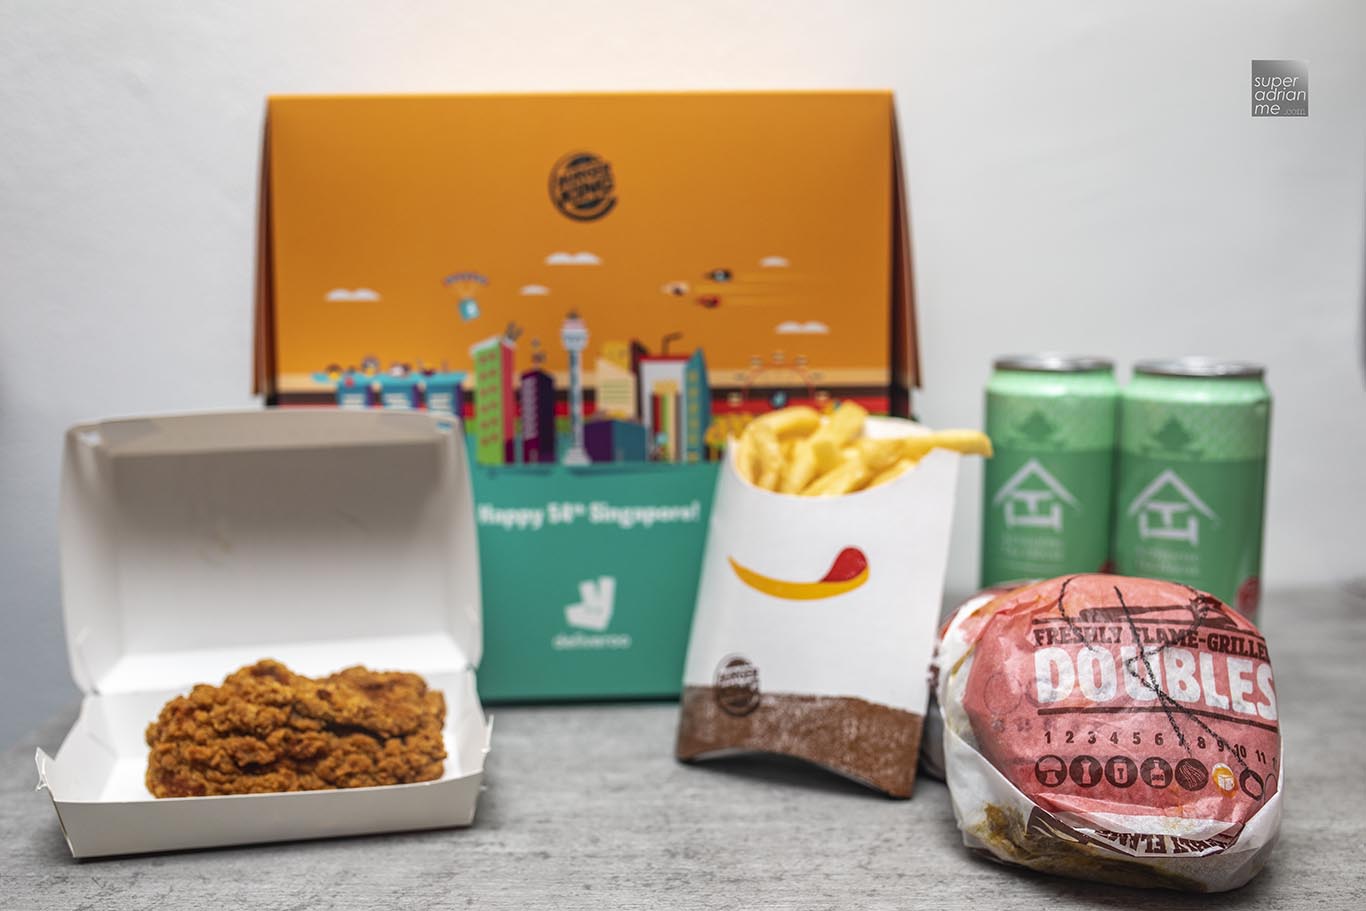 Burger King x Deliveroo Super Shiok Set in a collectible box and tea tower